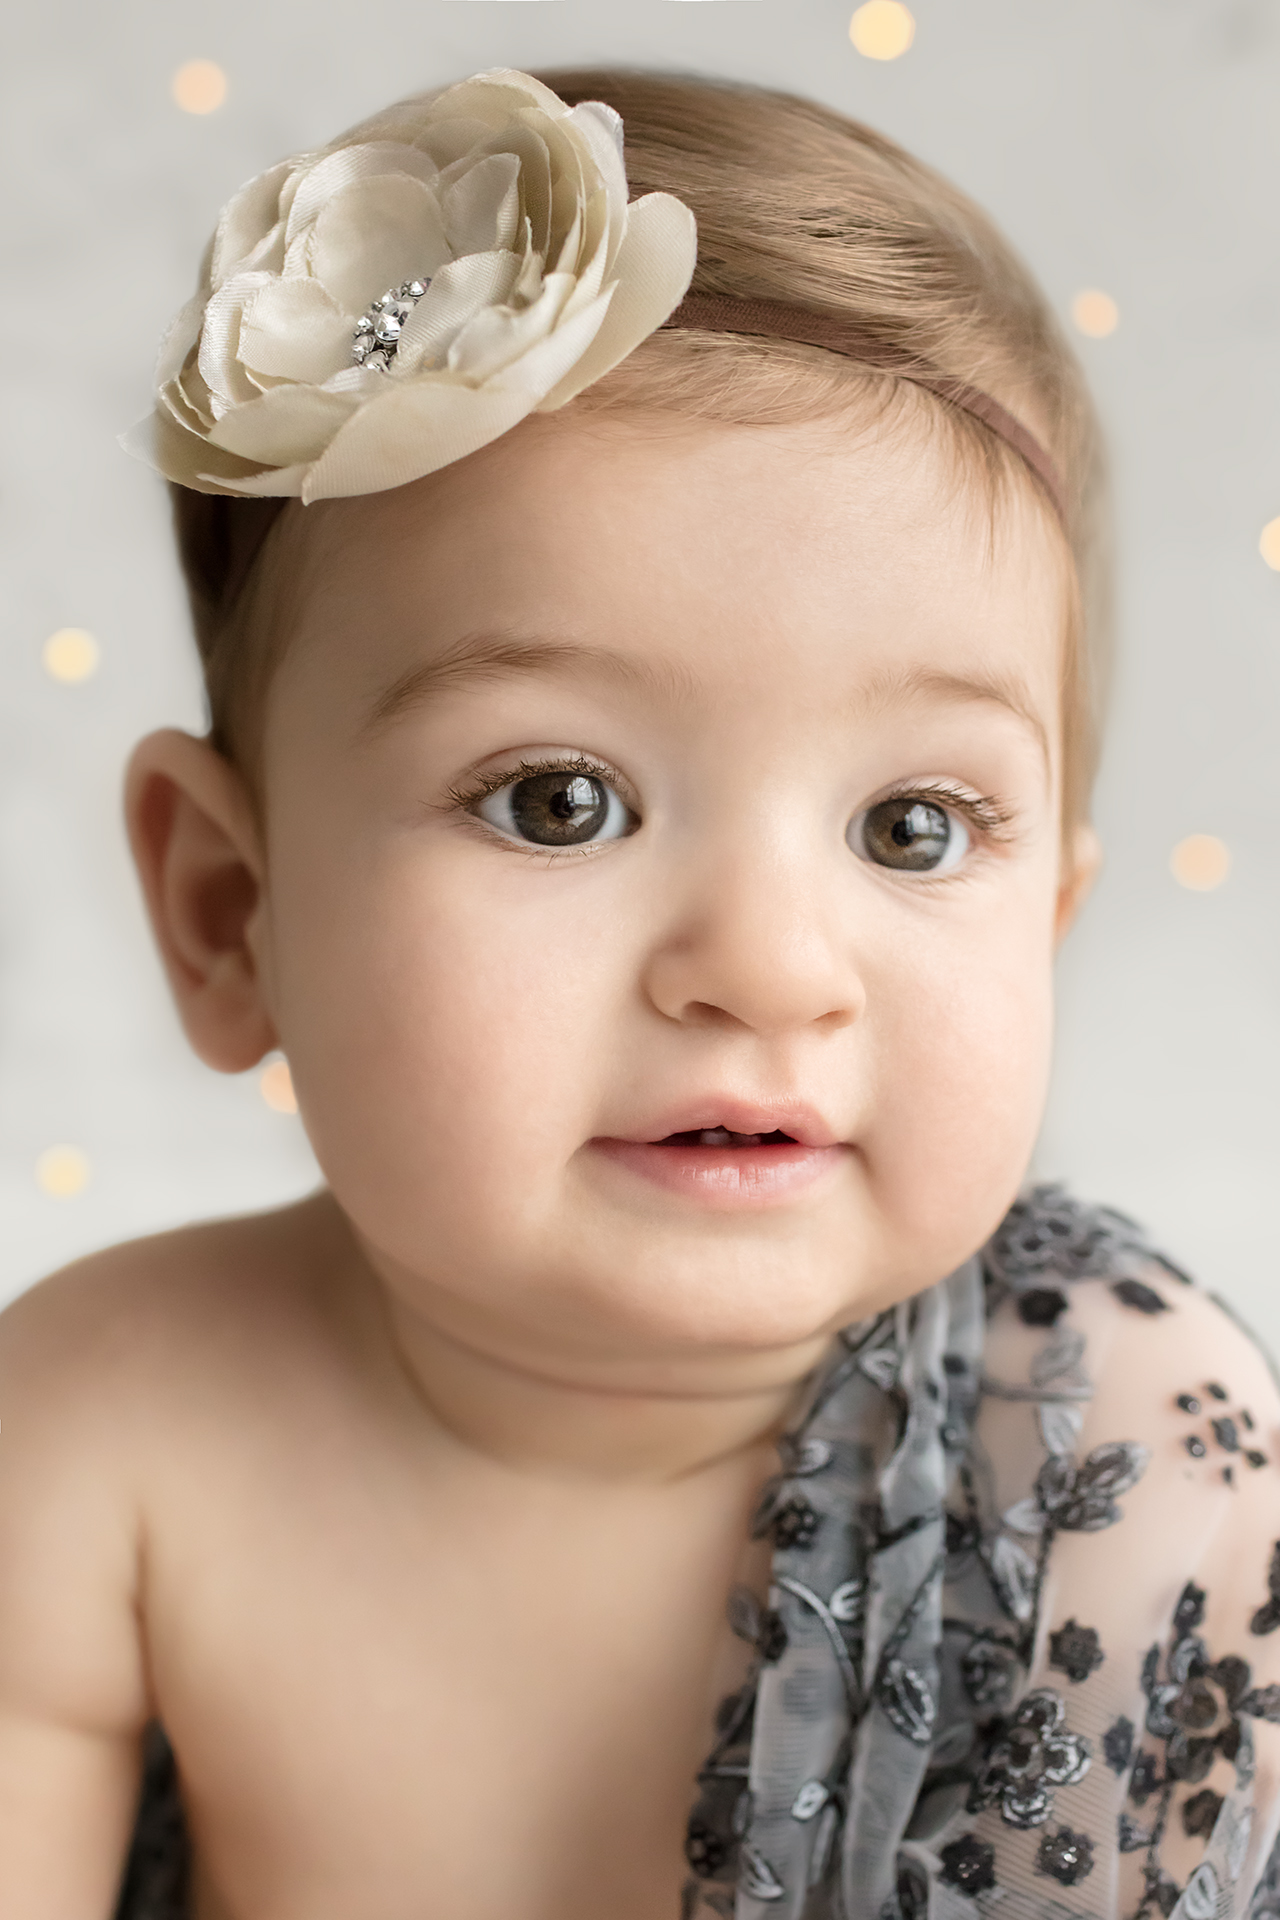 9 month old baby girl in gray lace and flower headband with sparkles for baby milestone portrait session